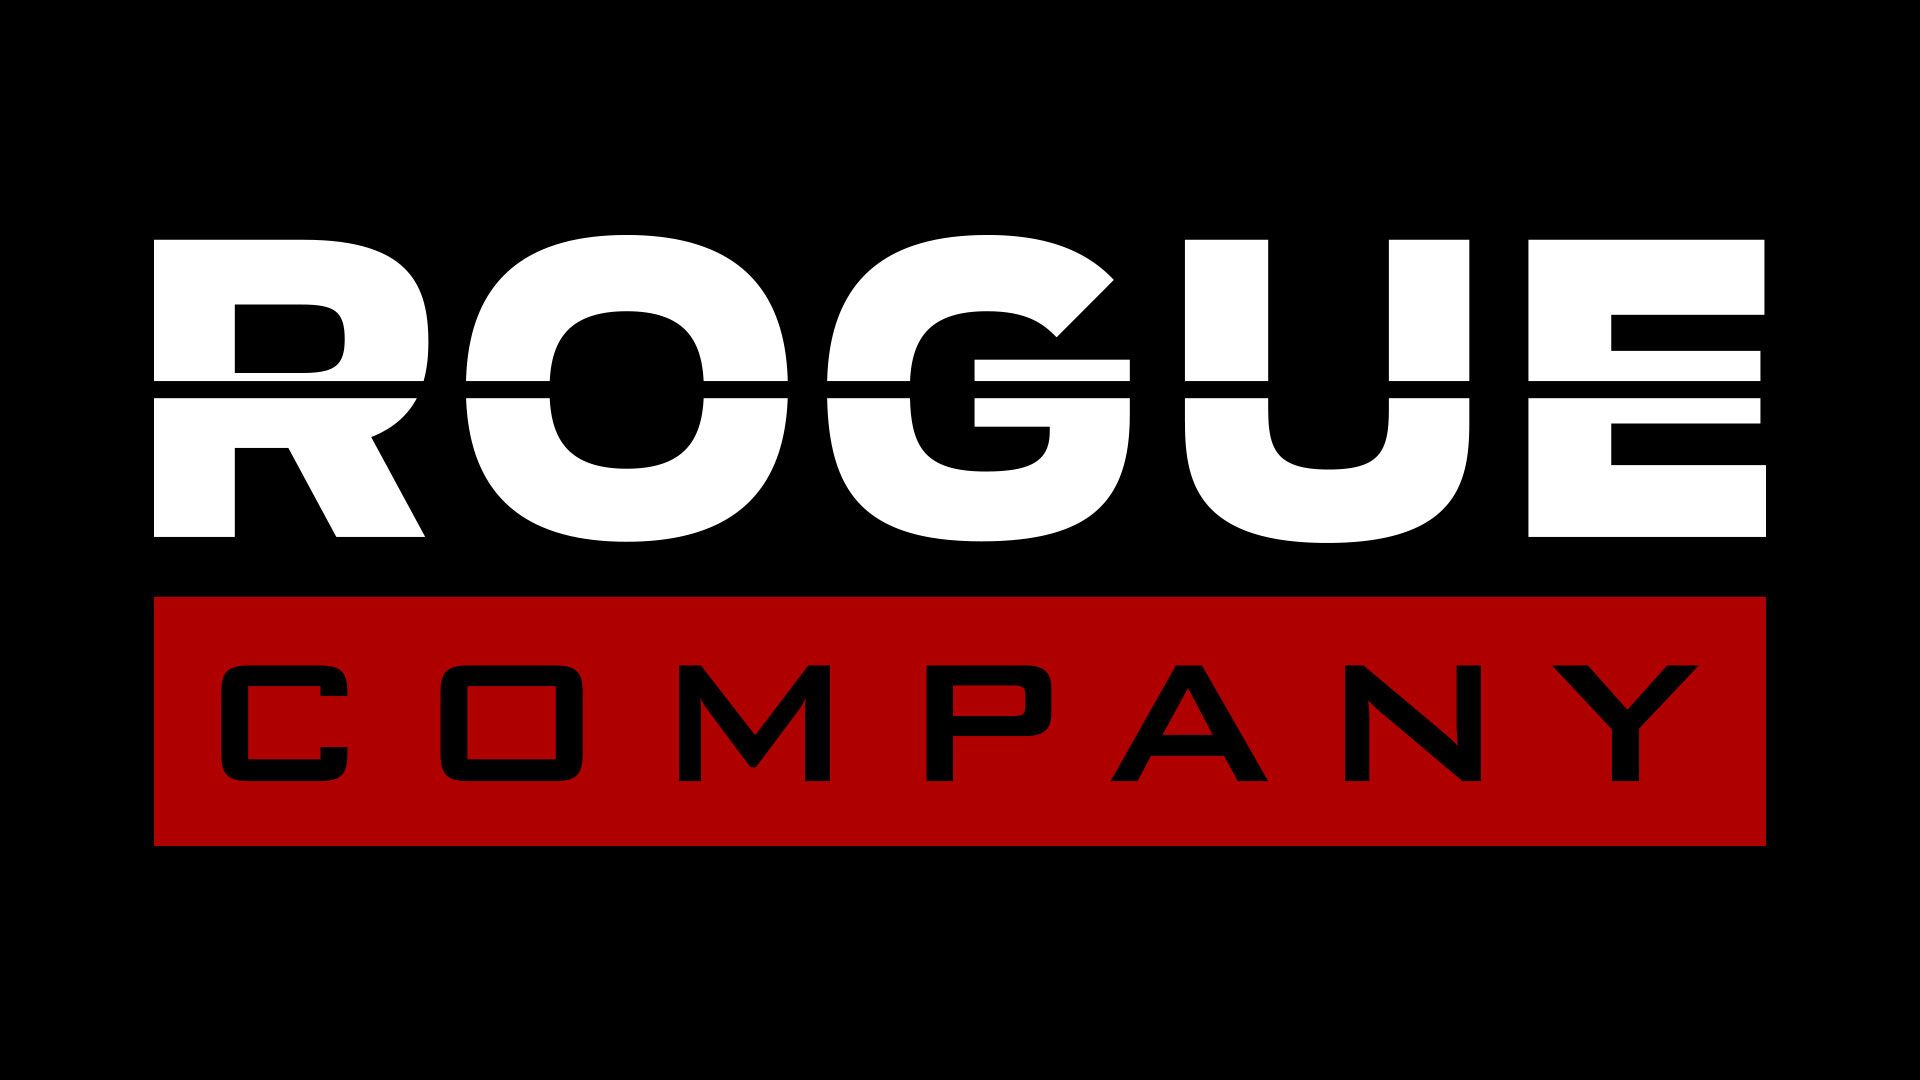 Rogue Company for Switch Game Reviews